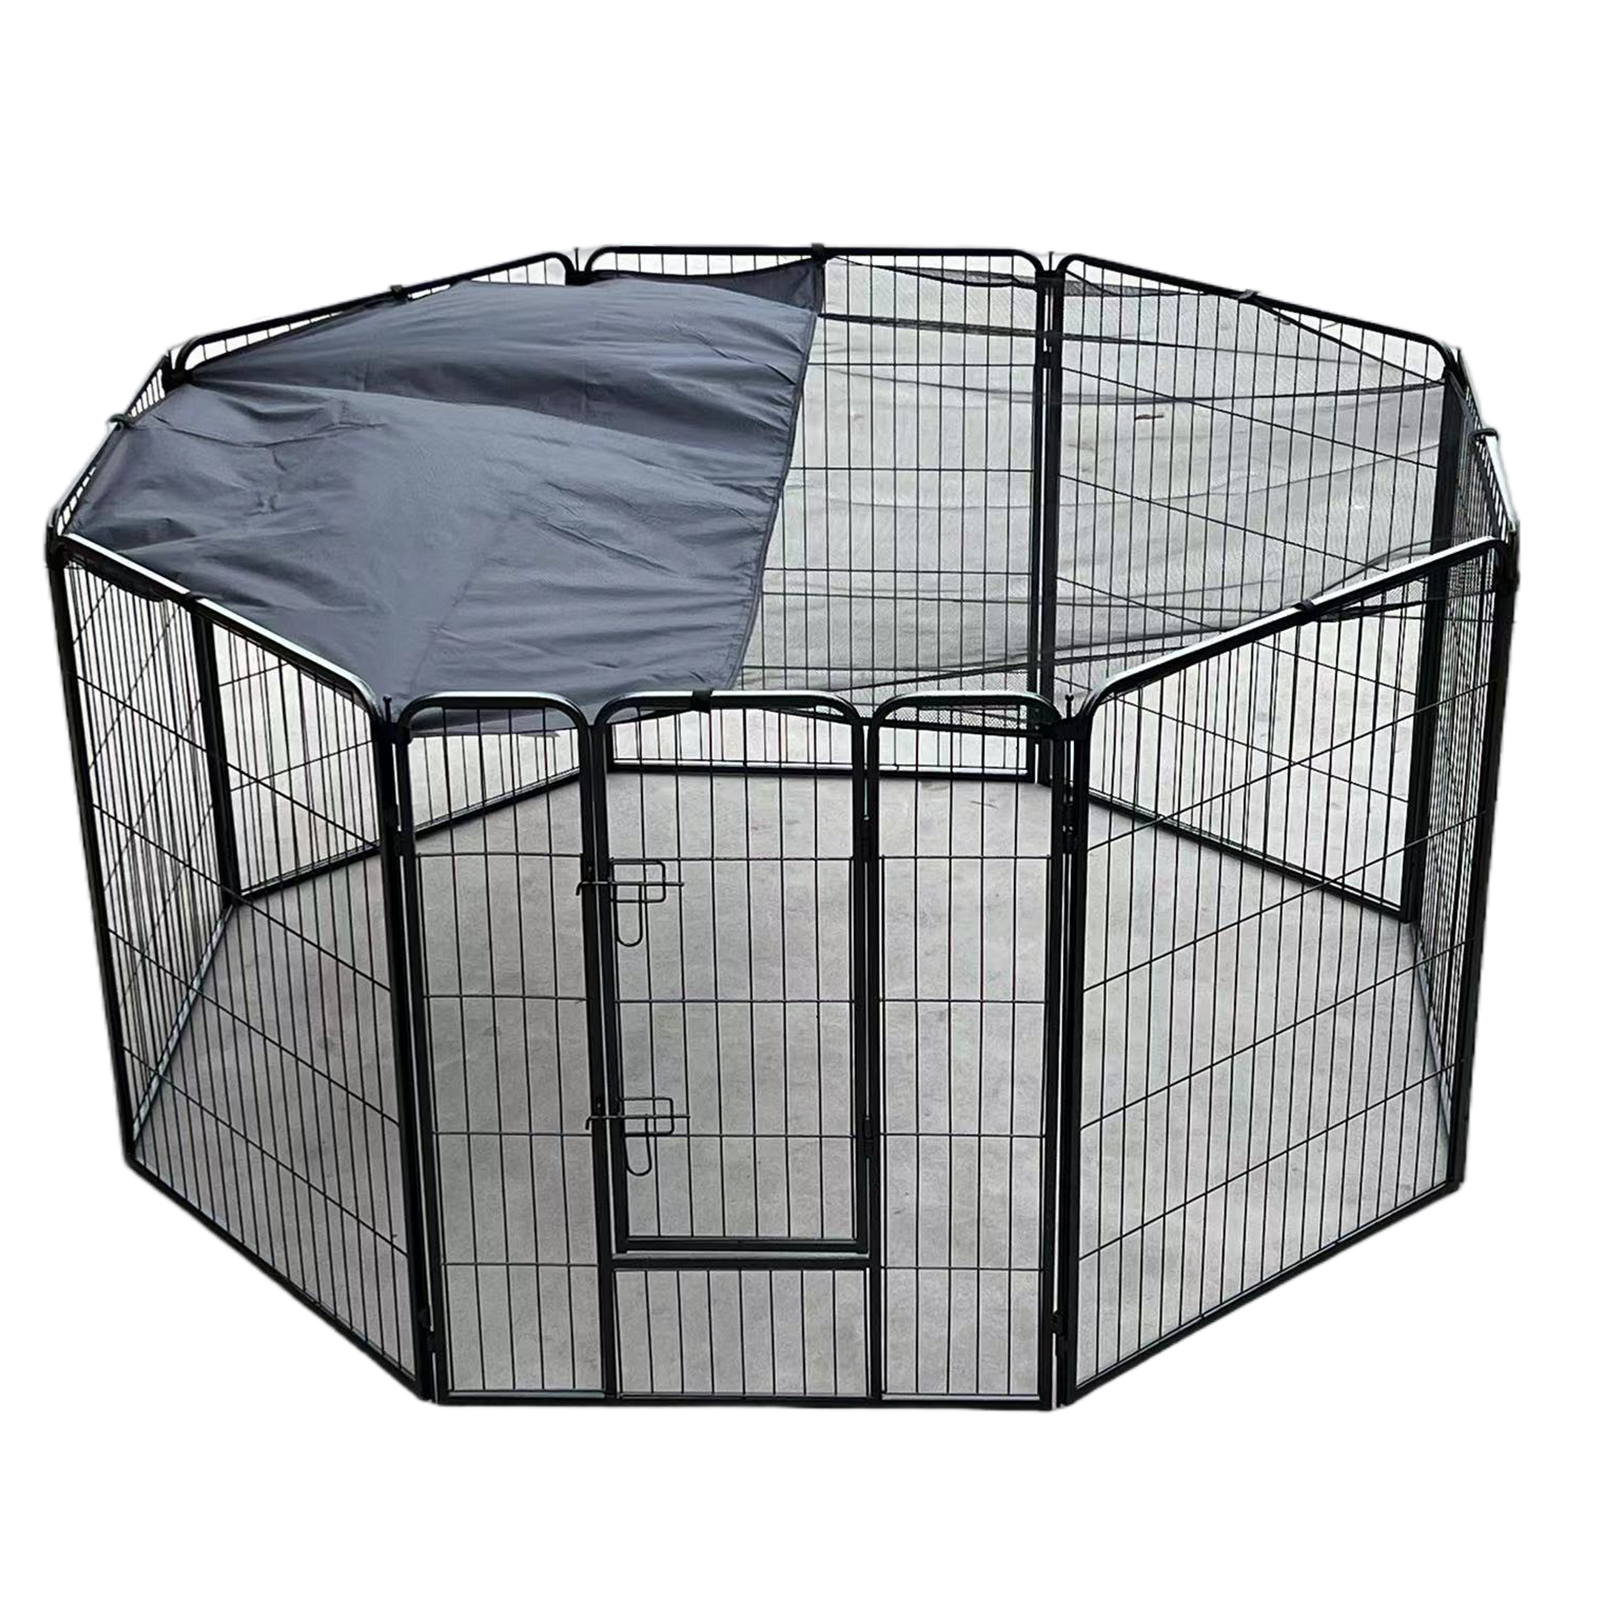 120 cm Heavy Duty Pet Dog Cat Rabbit Exercise Playpen Puppy Rabbit Fence With Cover